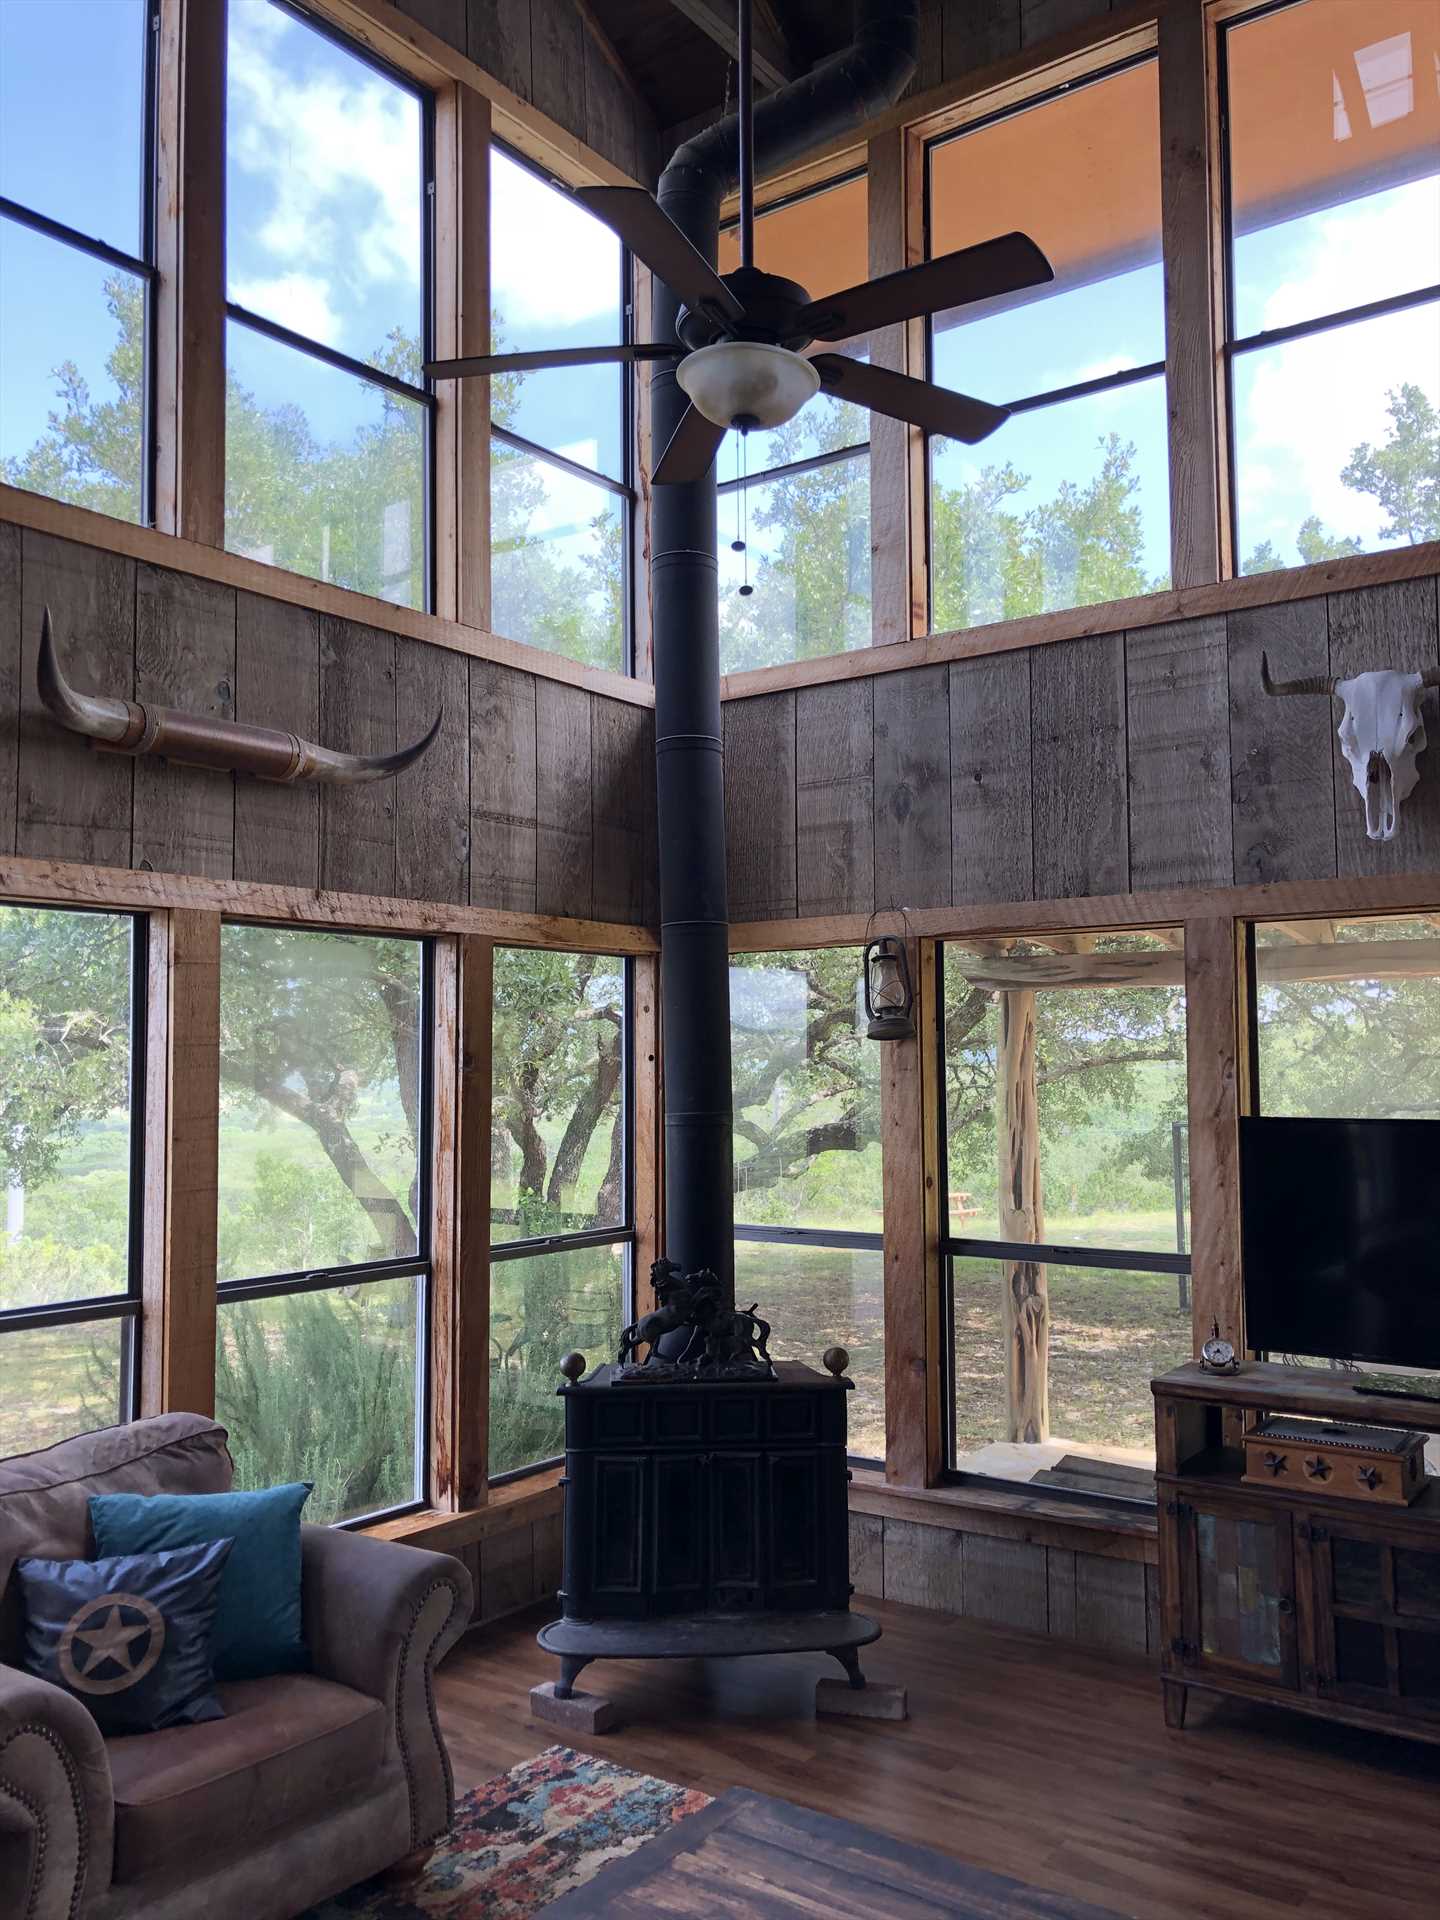                                                 The two-story-tall living area invites tons of natural light into the rustic space, and views of the Hill Country that have to be seen to be believed.